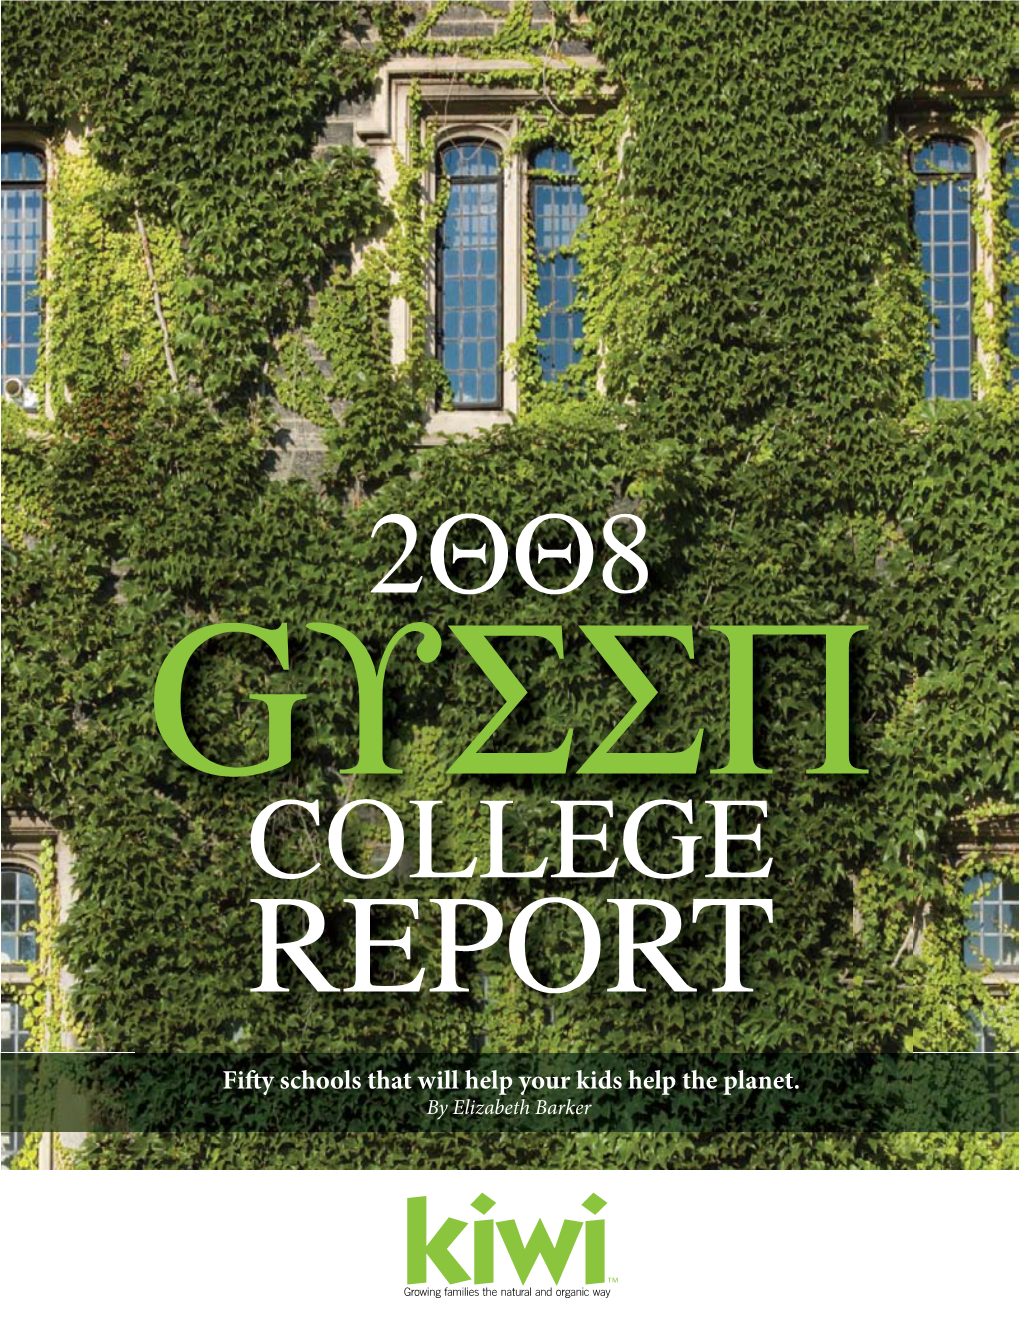 Top 75 U.S. Green Colleges